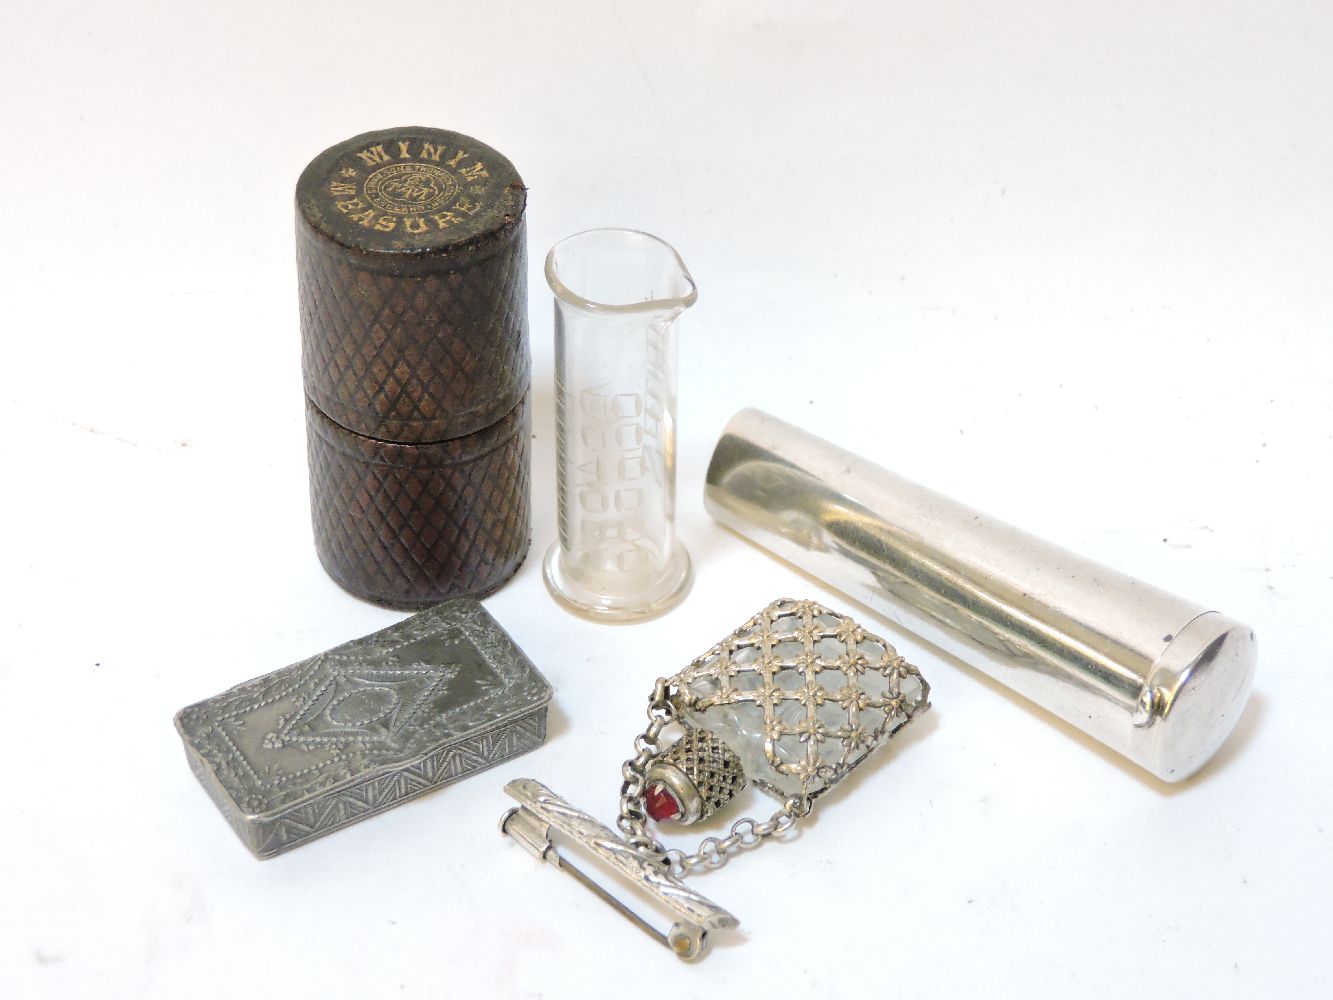 A silver cheroot holder case, a miniature scent bottle/brooch, a pewter miniature snuff box, and a